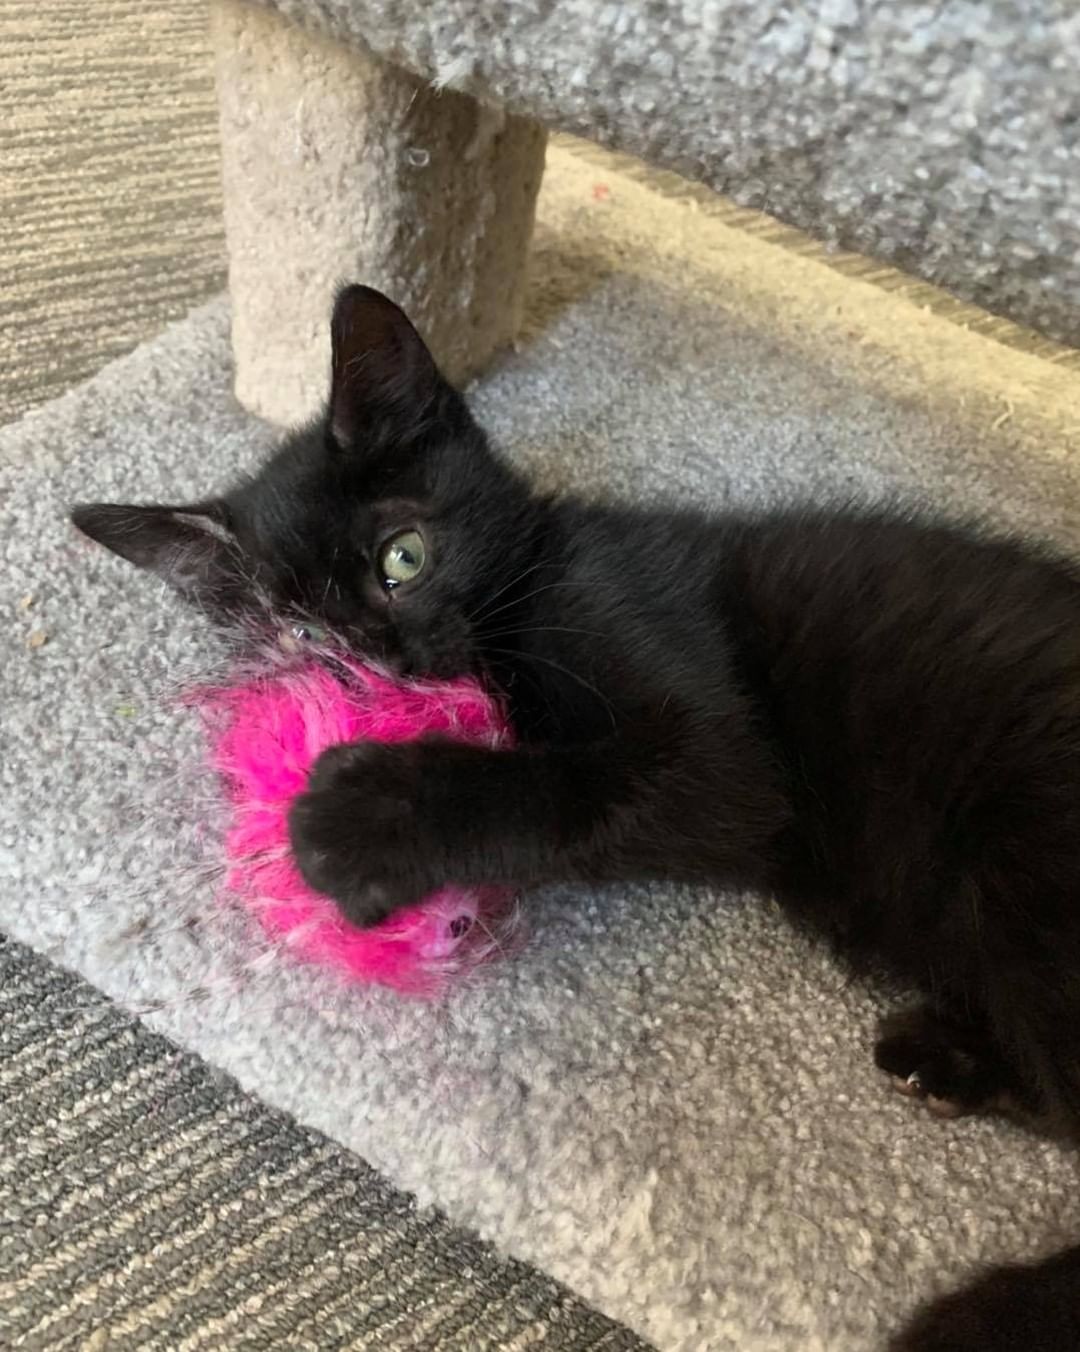 Our eighth black kitty for November is Turtle! He was pulled from a kill shelter with his mom and siblings and taken into foster care. He is a super loving boy who wants to do nothing but snuggle with his foster mom 😻 The pictures don’t do justice to how fuzzy he is! He is good with cats and dogs. Turtle is 3 months old, up to date on vaccines and FIV/FELV negative. To put in an application click on the link below.

https://www.sbanimalrescue.org/adopt